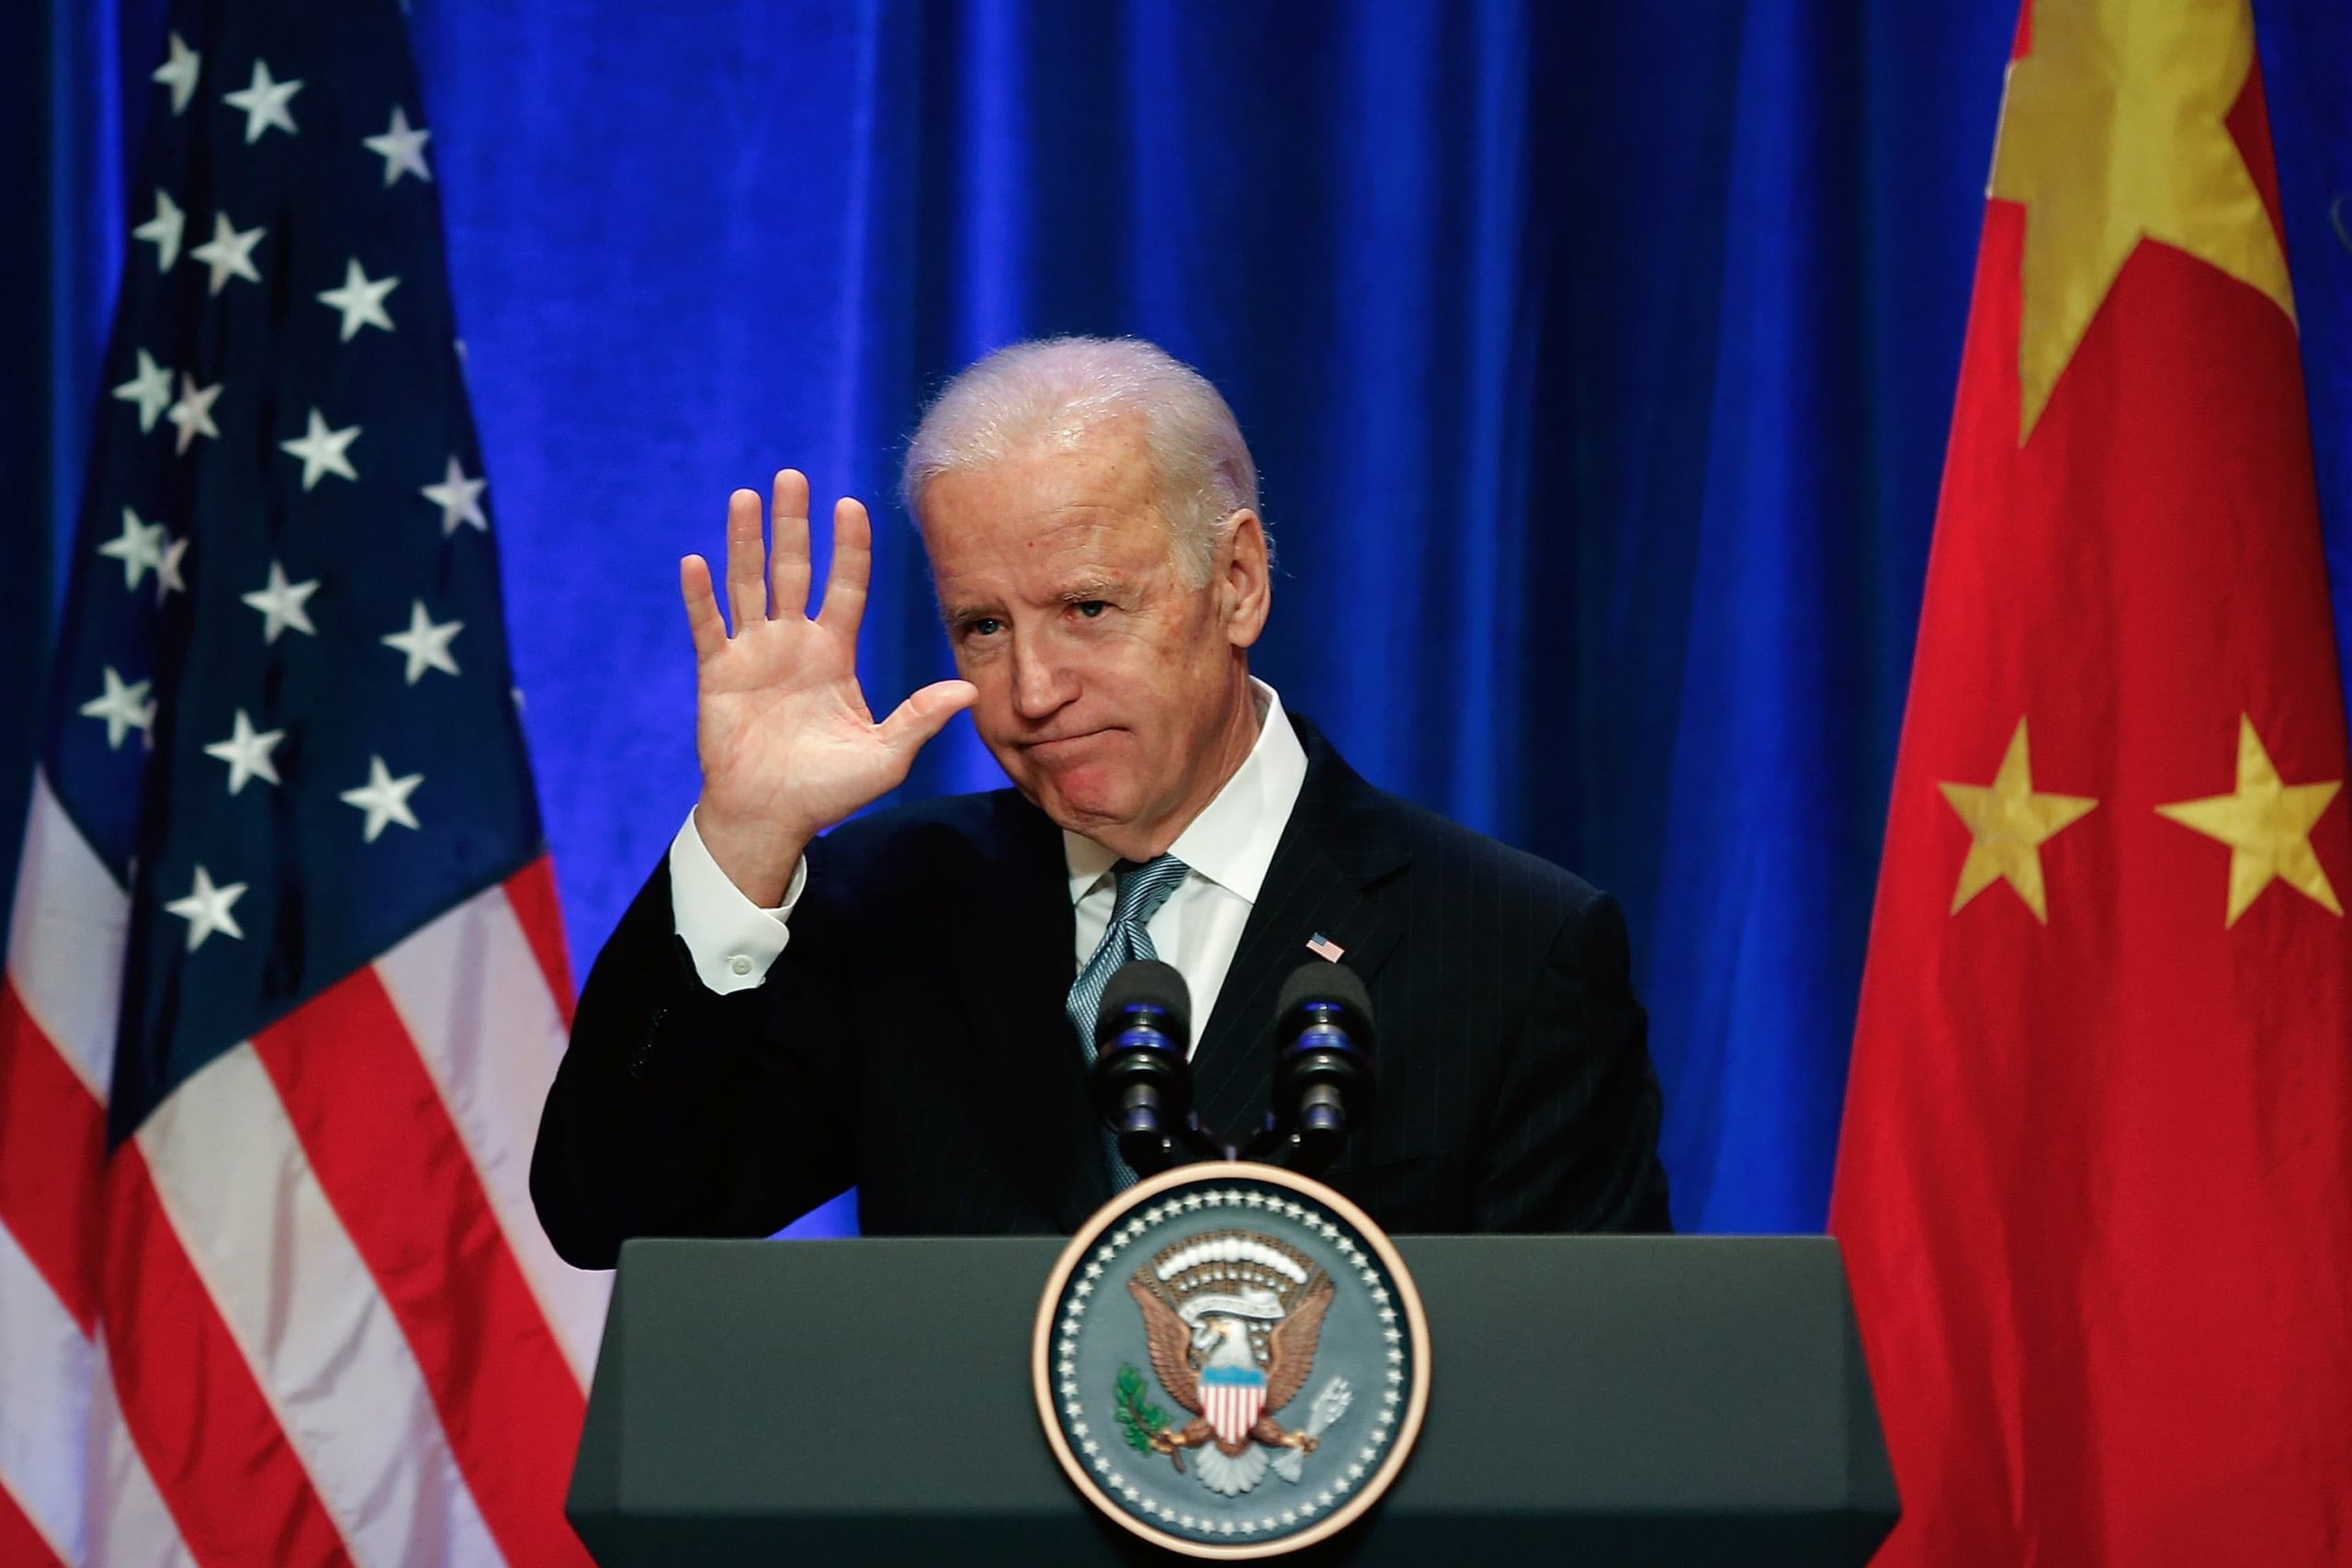 Biden’s WH: ‘Foreign policy may be tough for China’